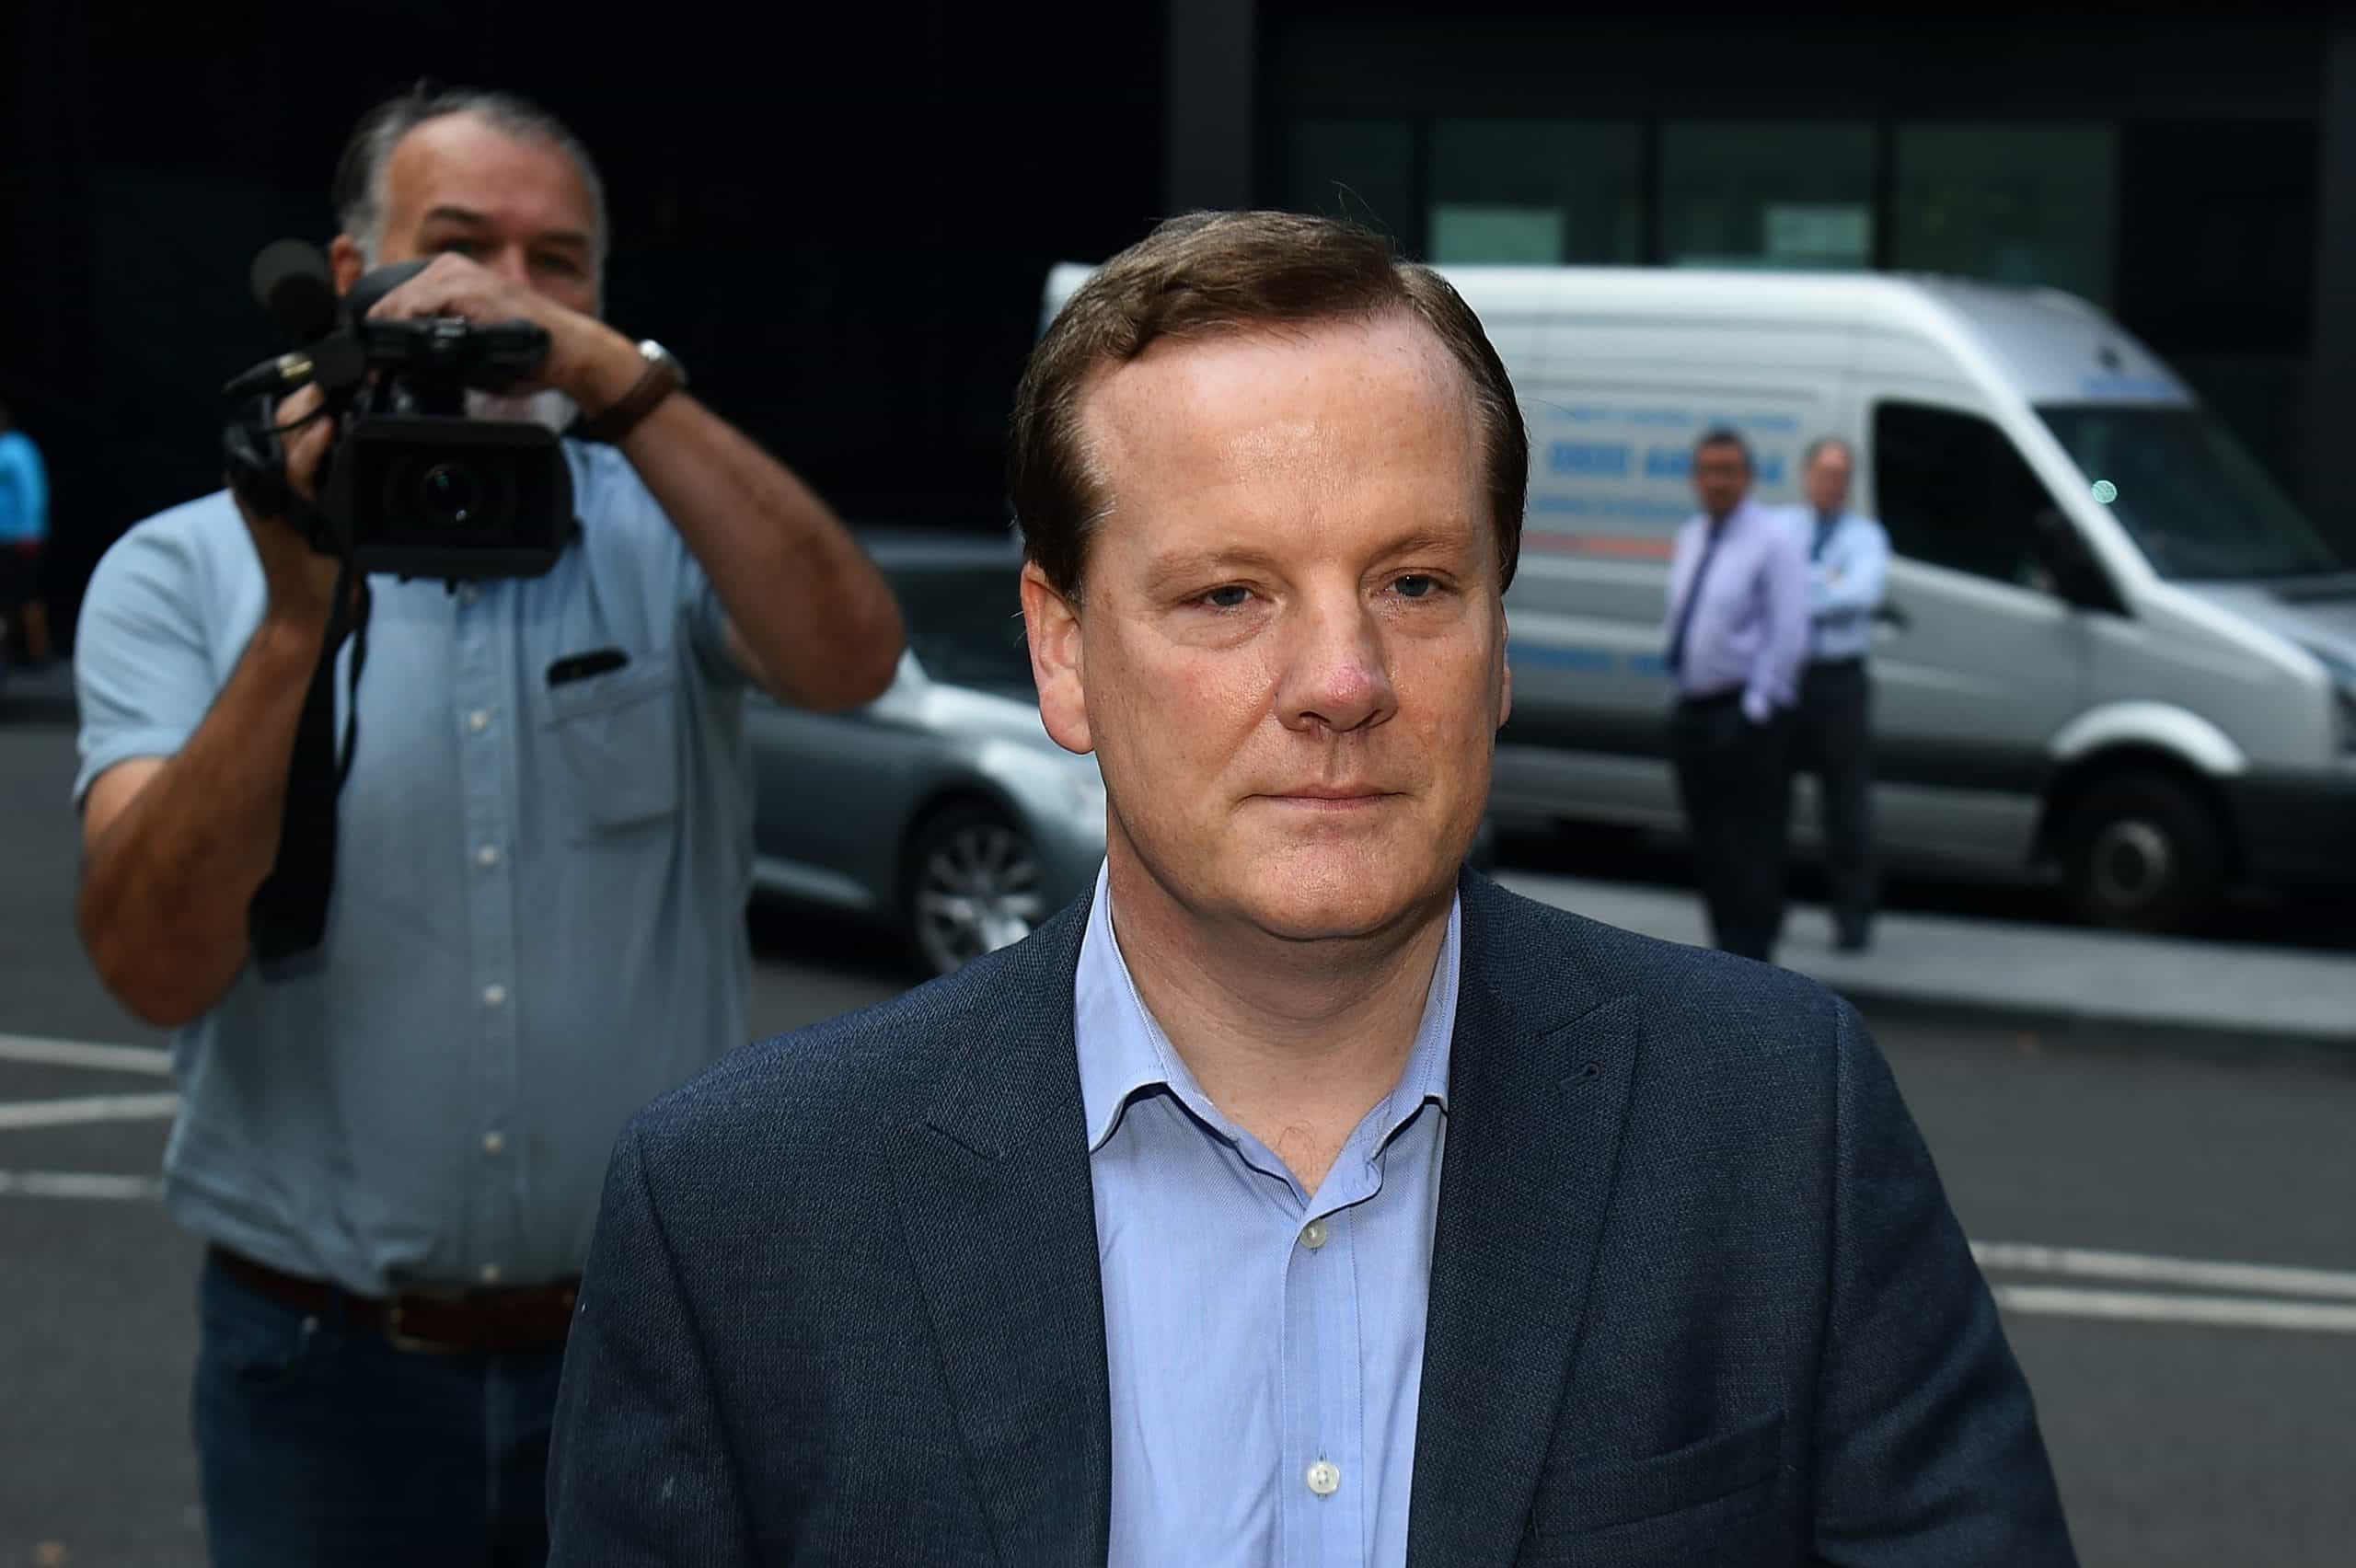 After Elphicke jailed it’s revealed politicians and spiritual leader among character referees